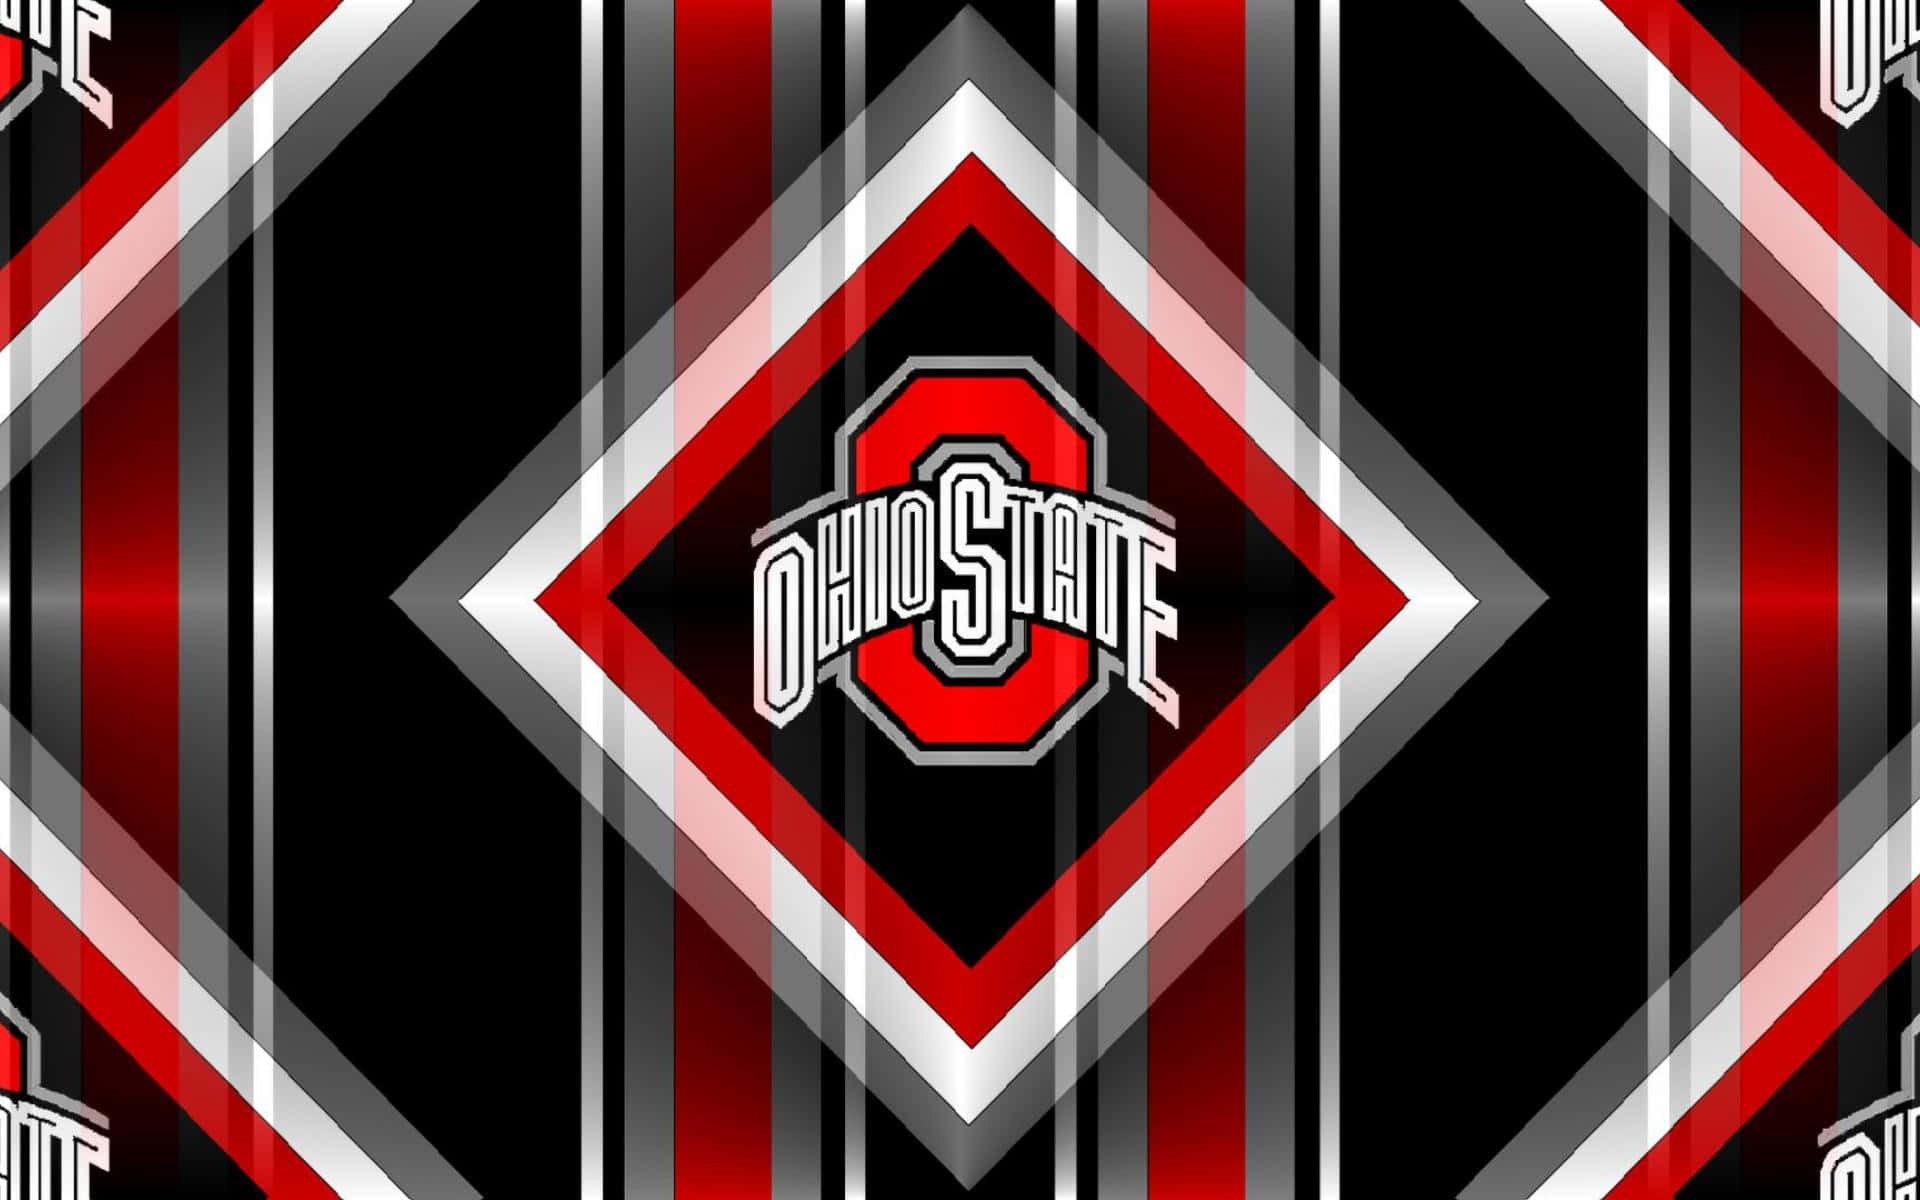 Fans of the Ohio State football team showing their love. Wallpaper